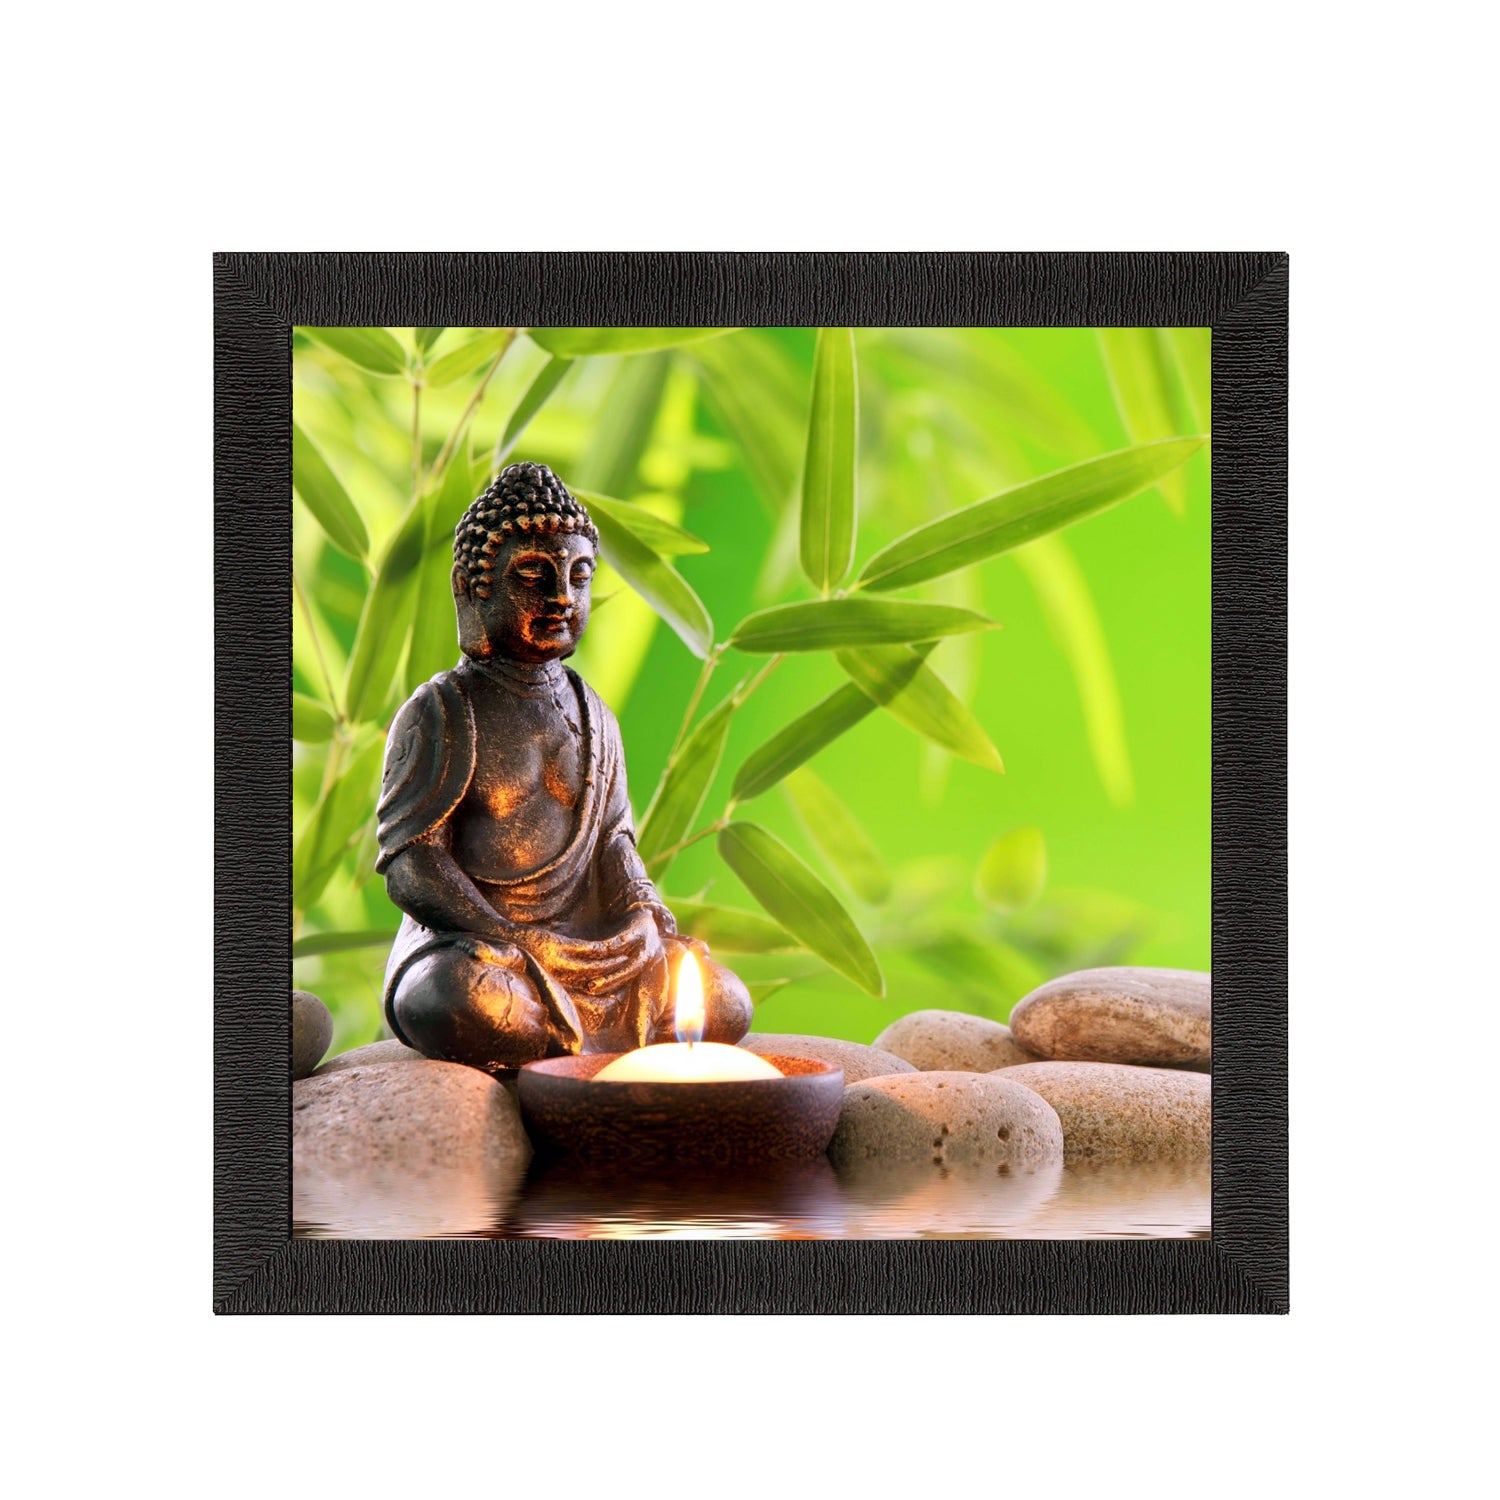 Meditating Lord Buddha Painting With Candle Digital Printed Religious Wall Art